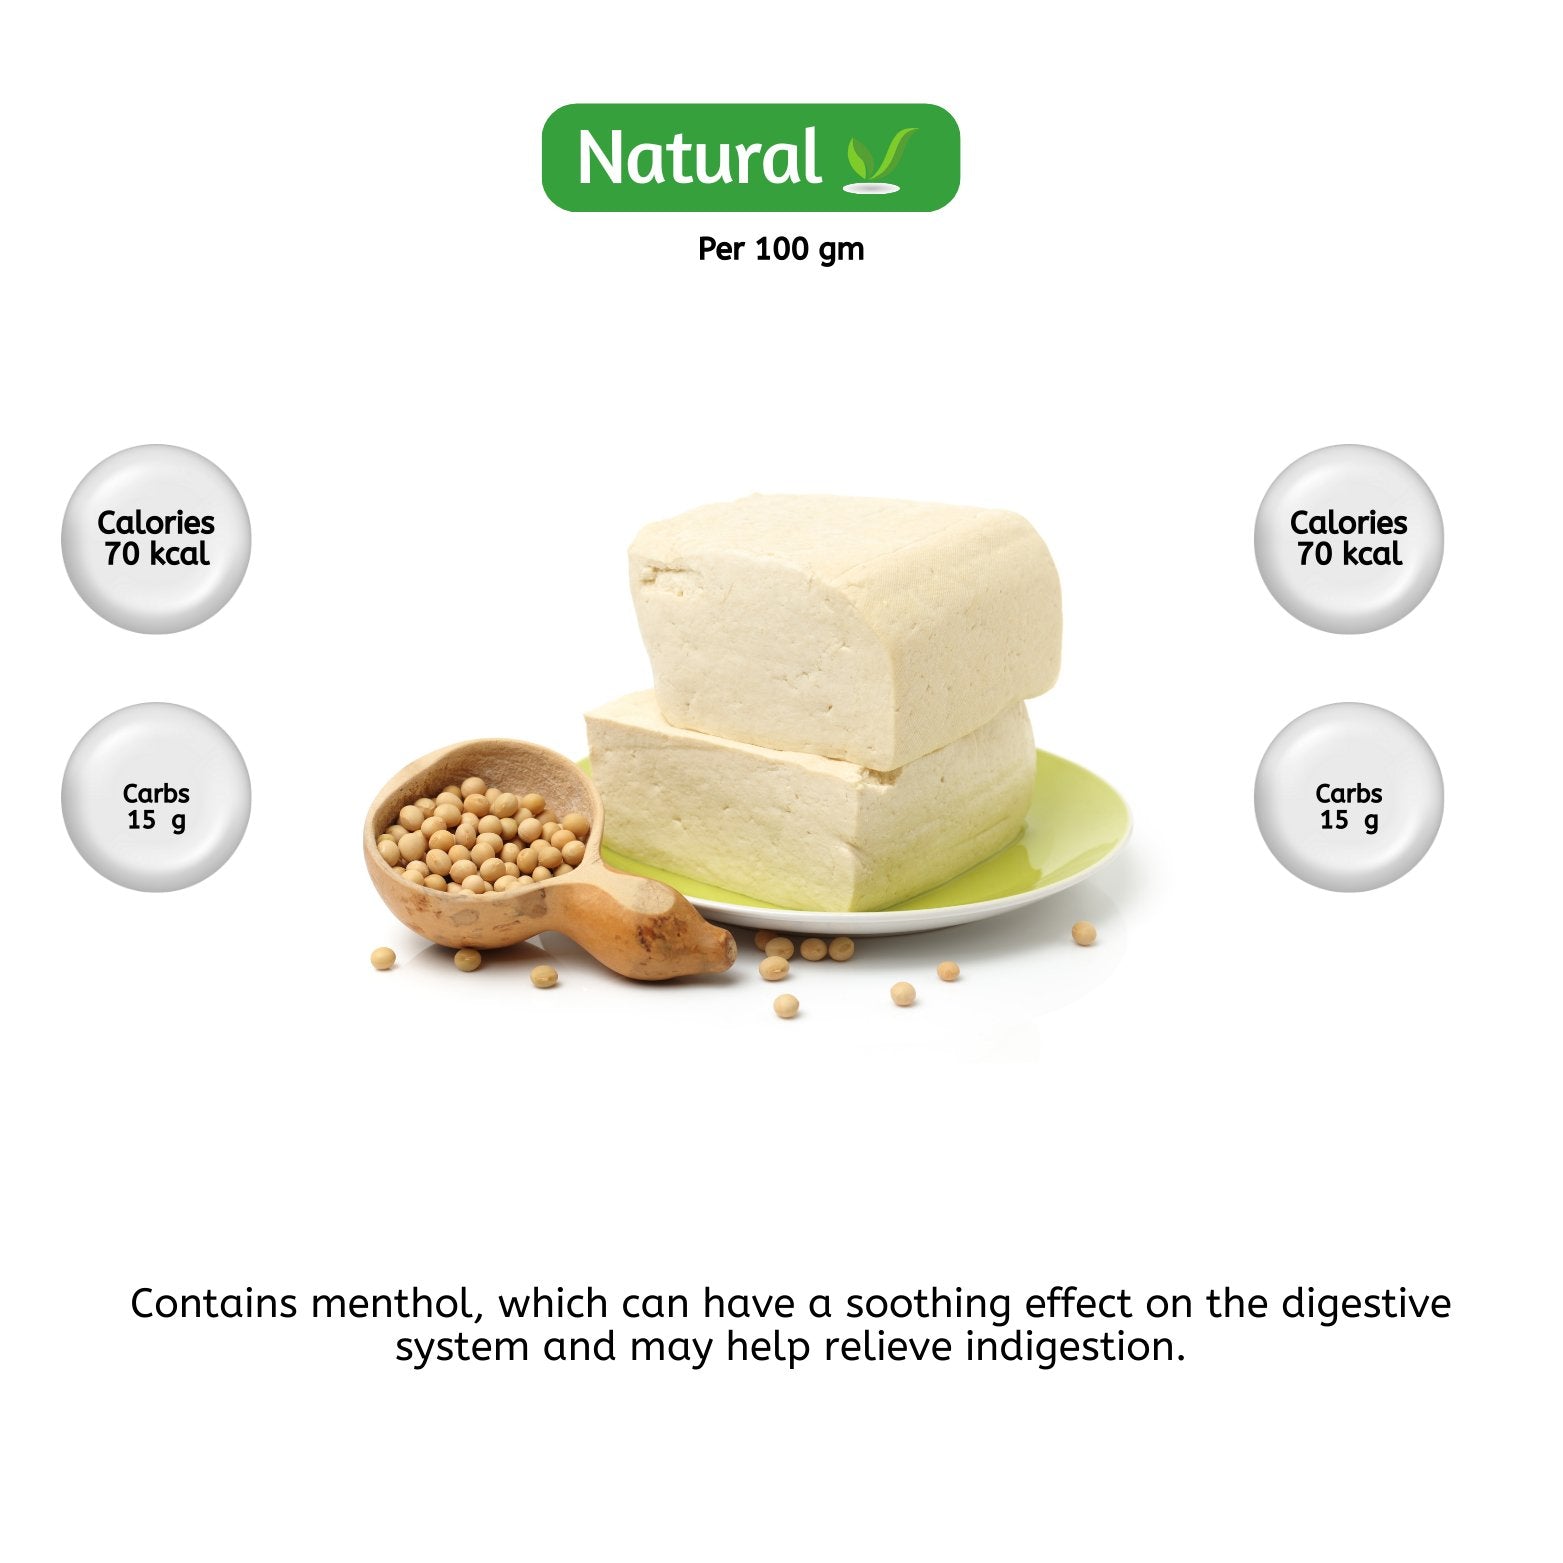 vegan special | organic Tofu Plain - Online store for organic products in Bangalore - Native Dairy products